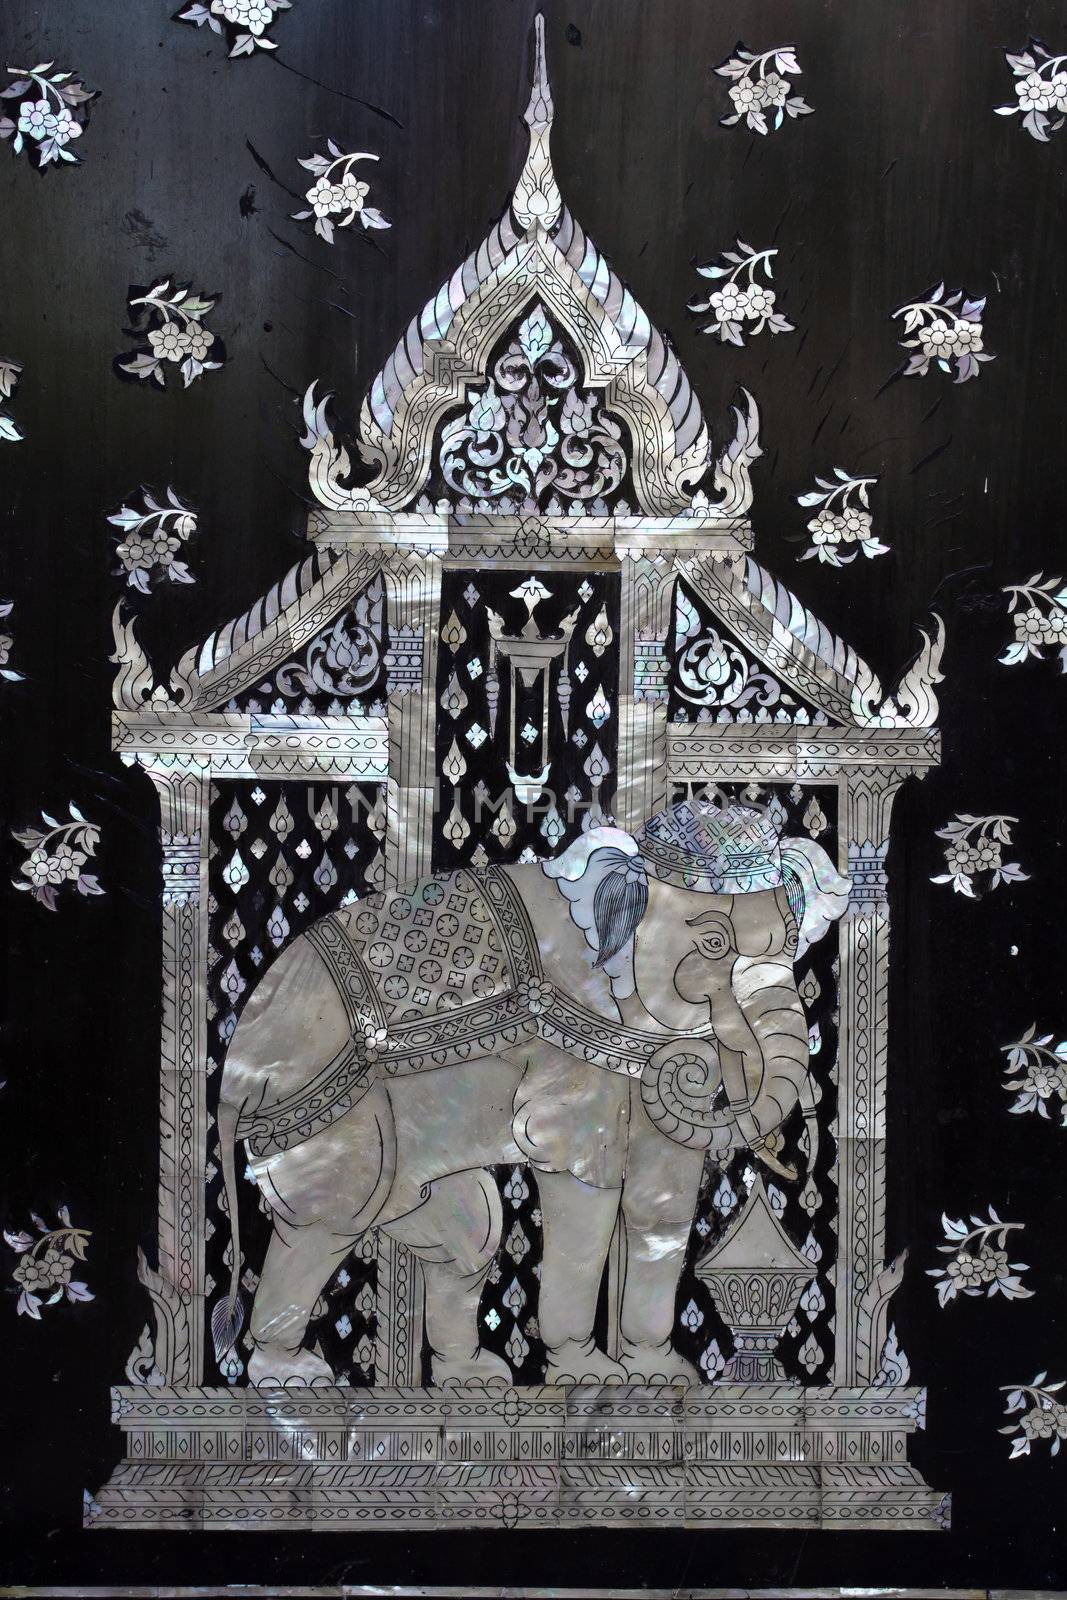 Traditional Thai style church door art, decorated with pieces oyster shell